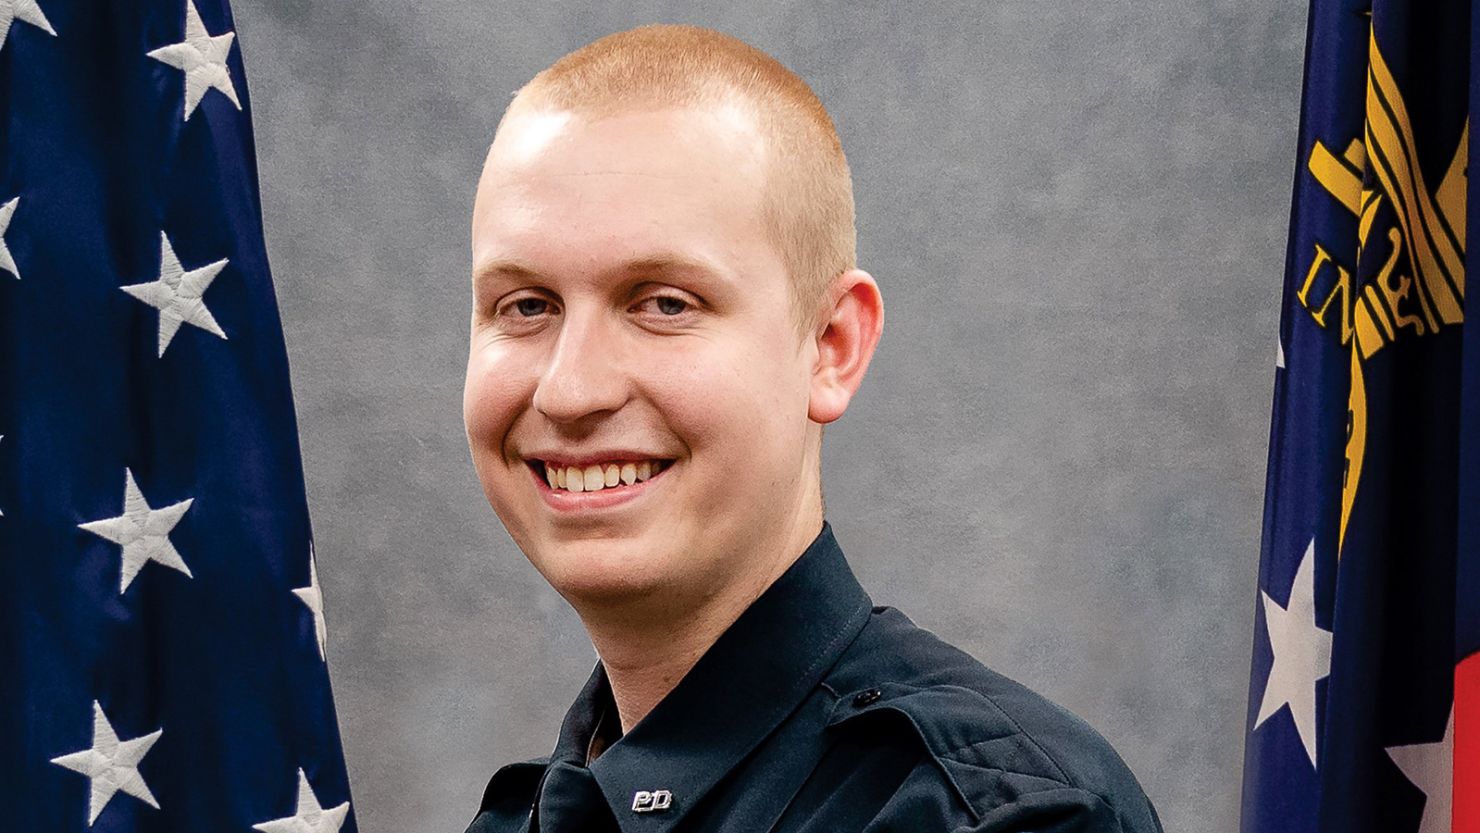 Holly Springs police Officer Joe Burson had been with the department for about a year and a half.